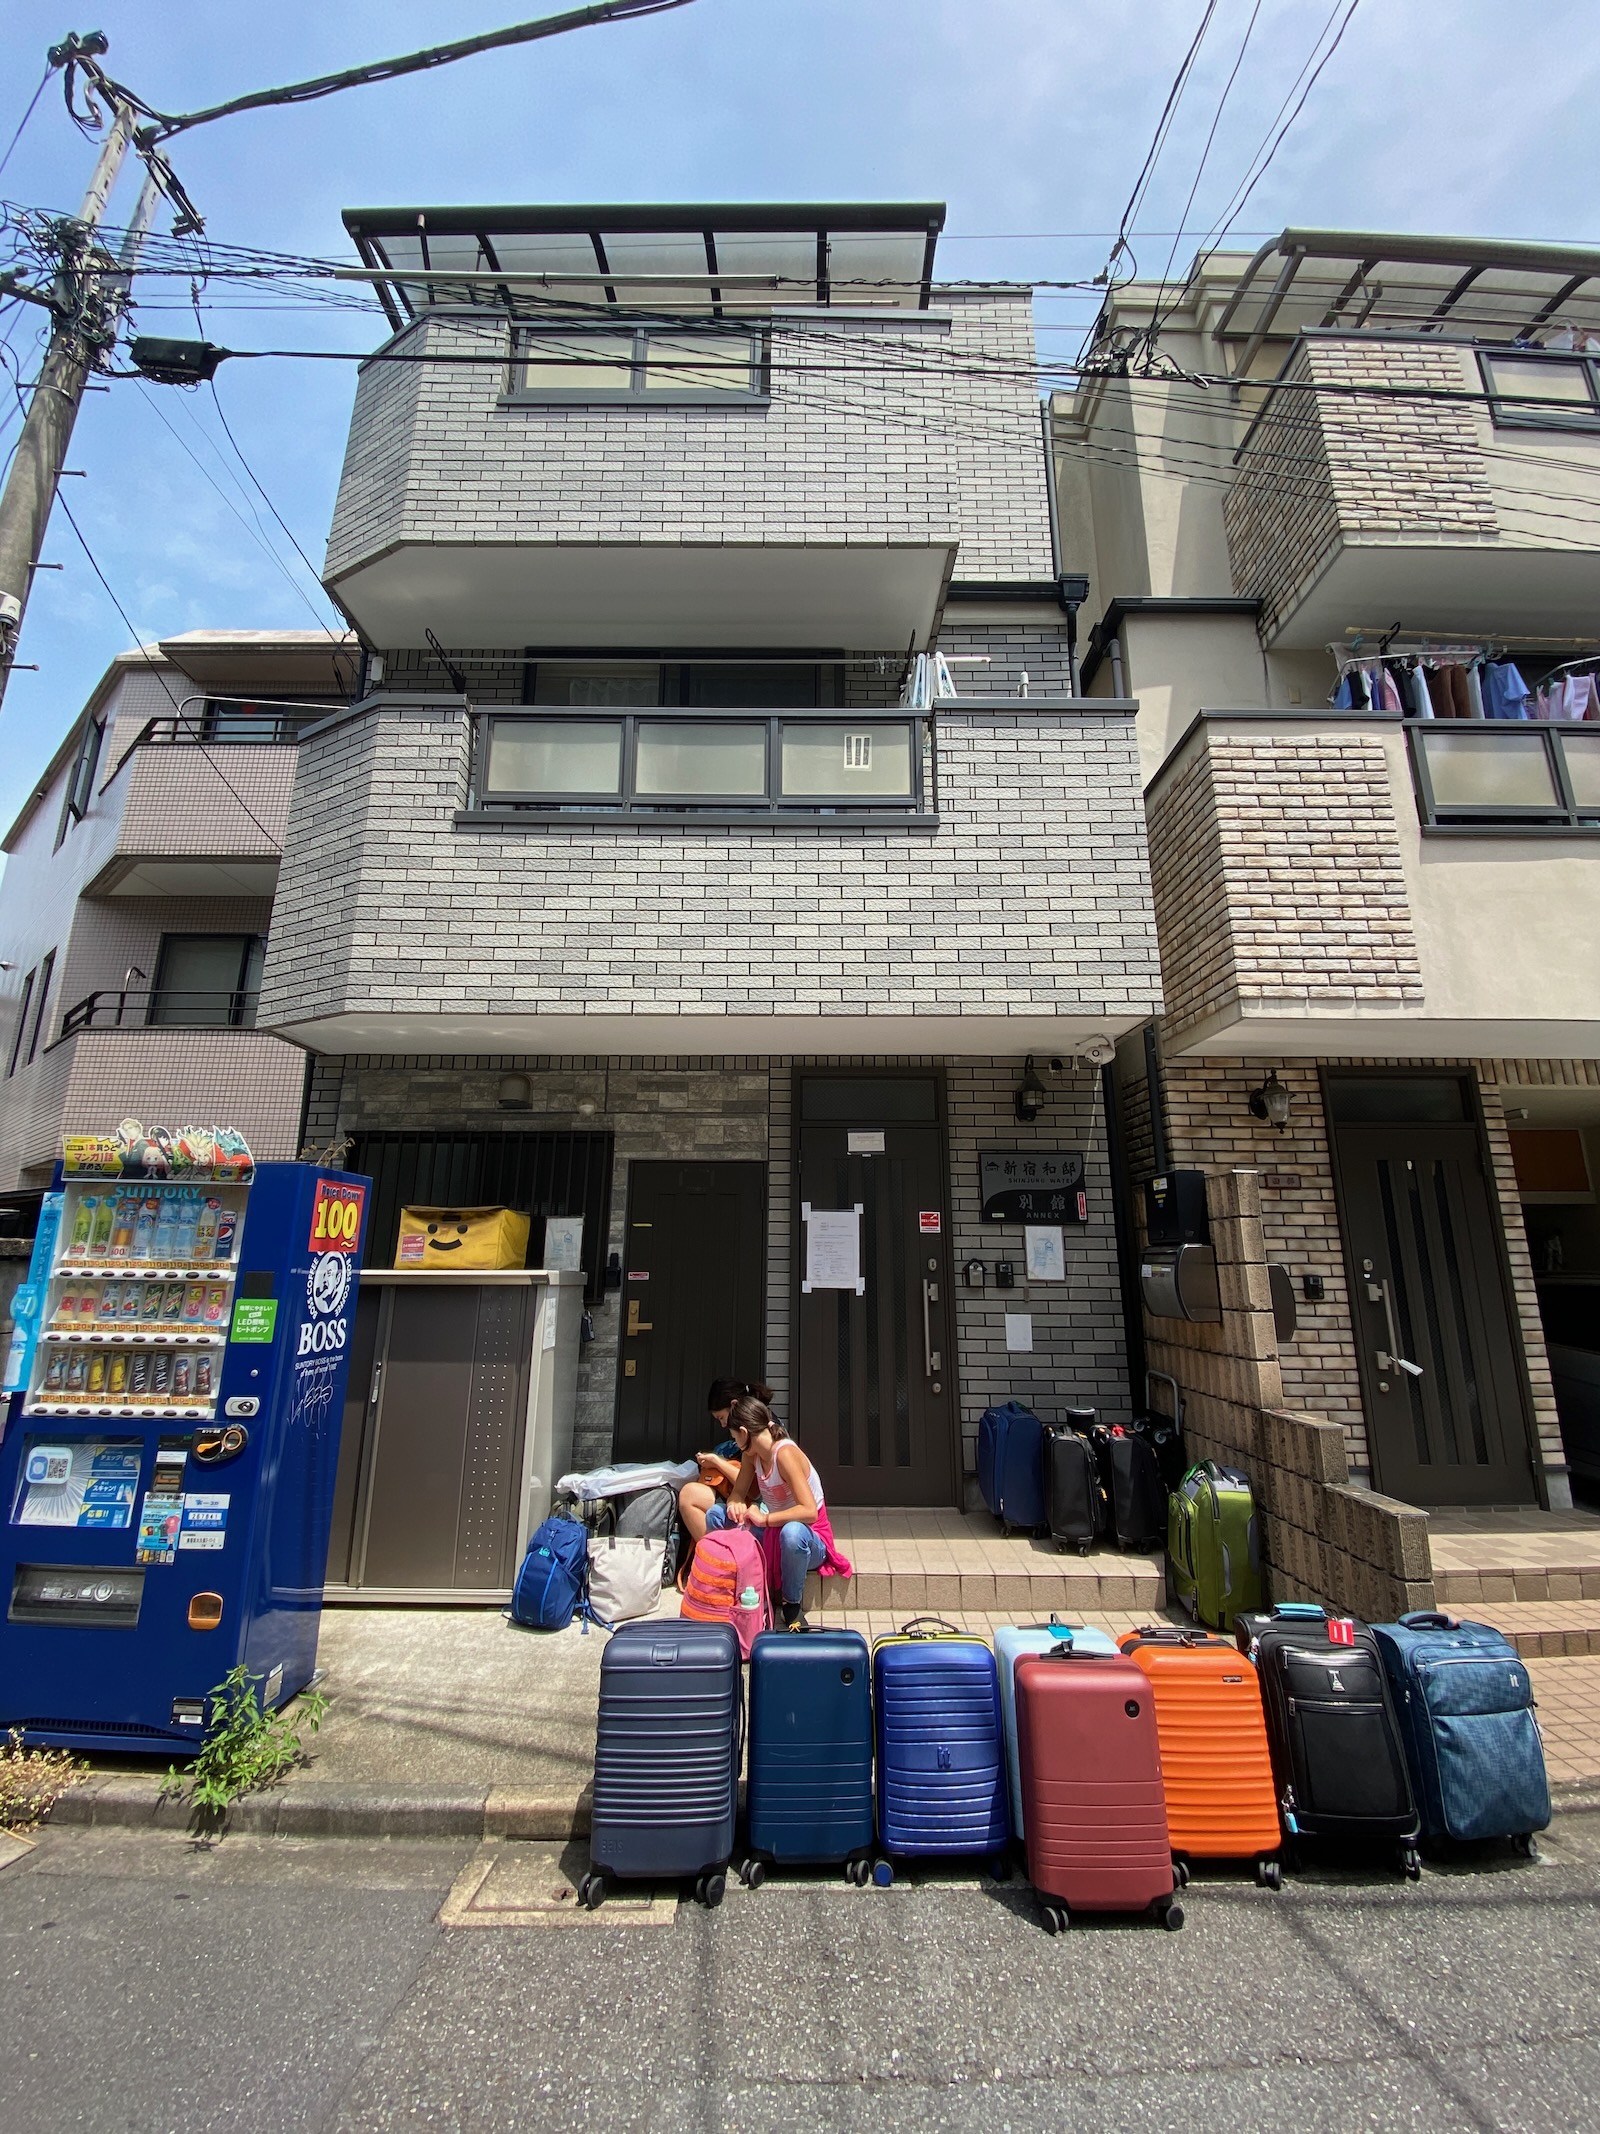 A row of colorful hard-sided rolling suitcases lined up outside an apartment building.